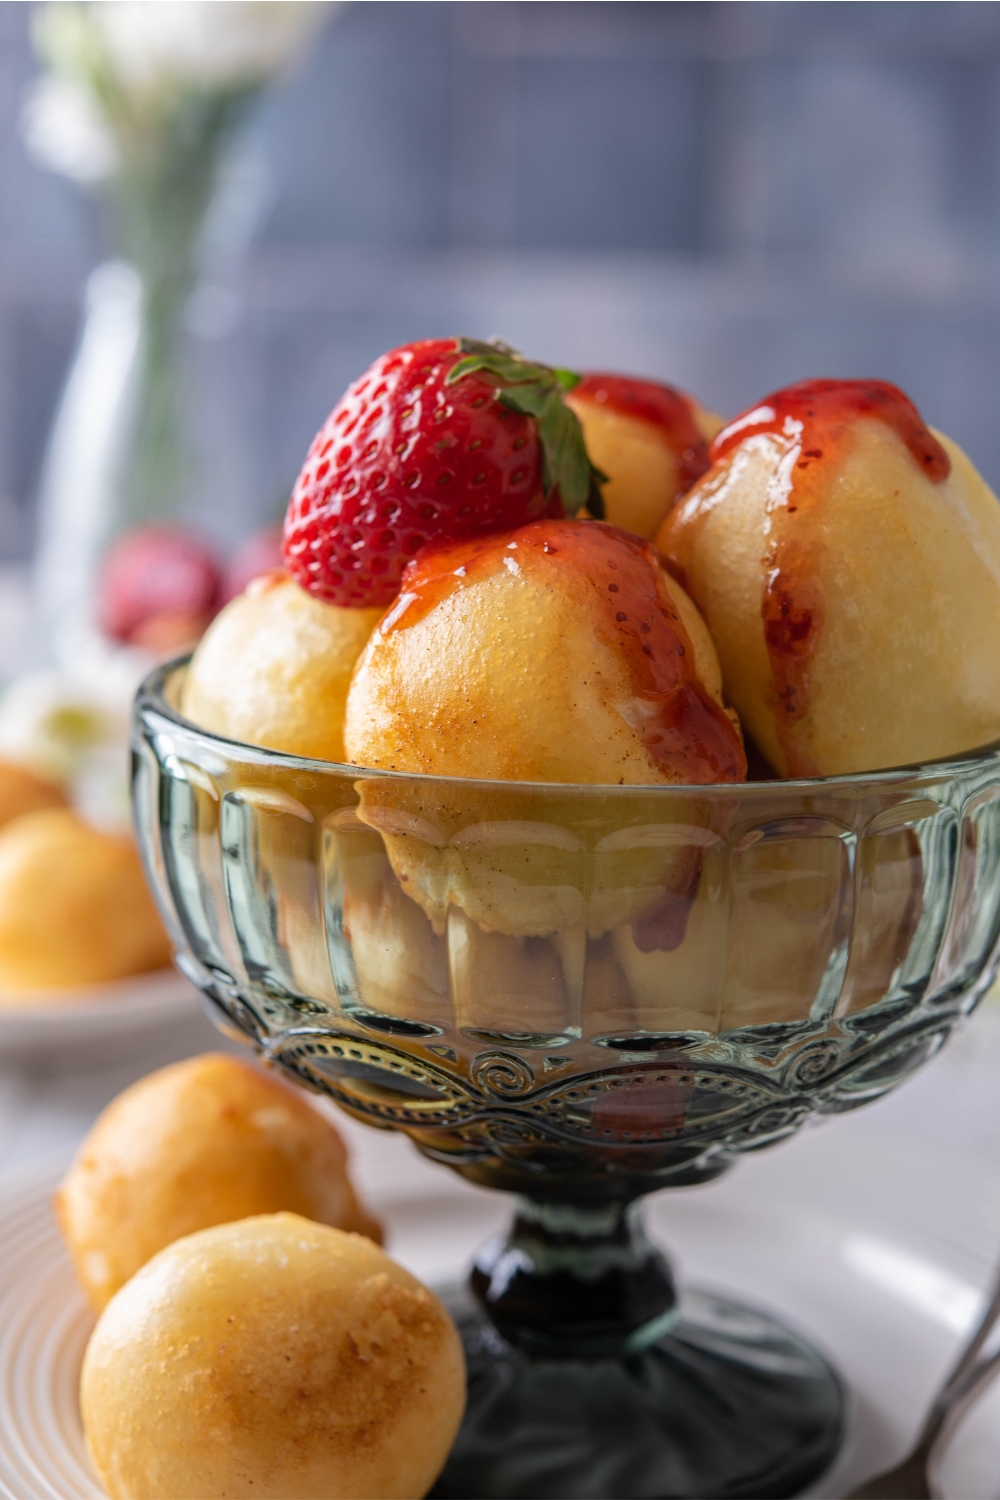 A side view of a dessert bowl with Fried cheesecake balls drizzled in strawberry syrup with a strawberry garnished on top.